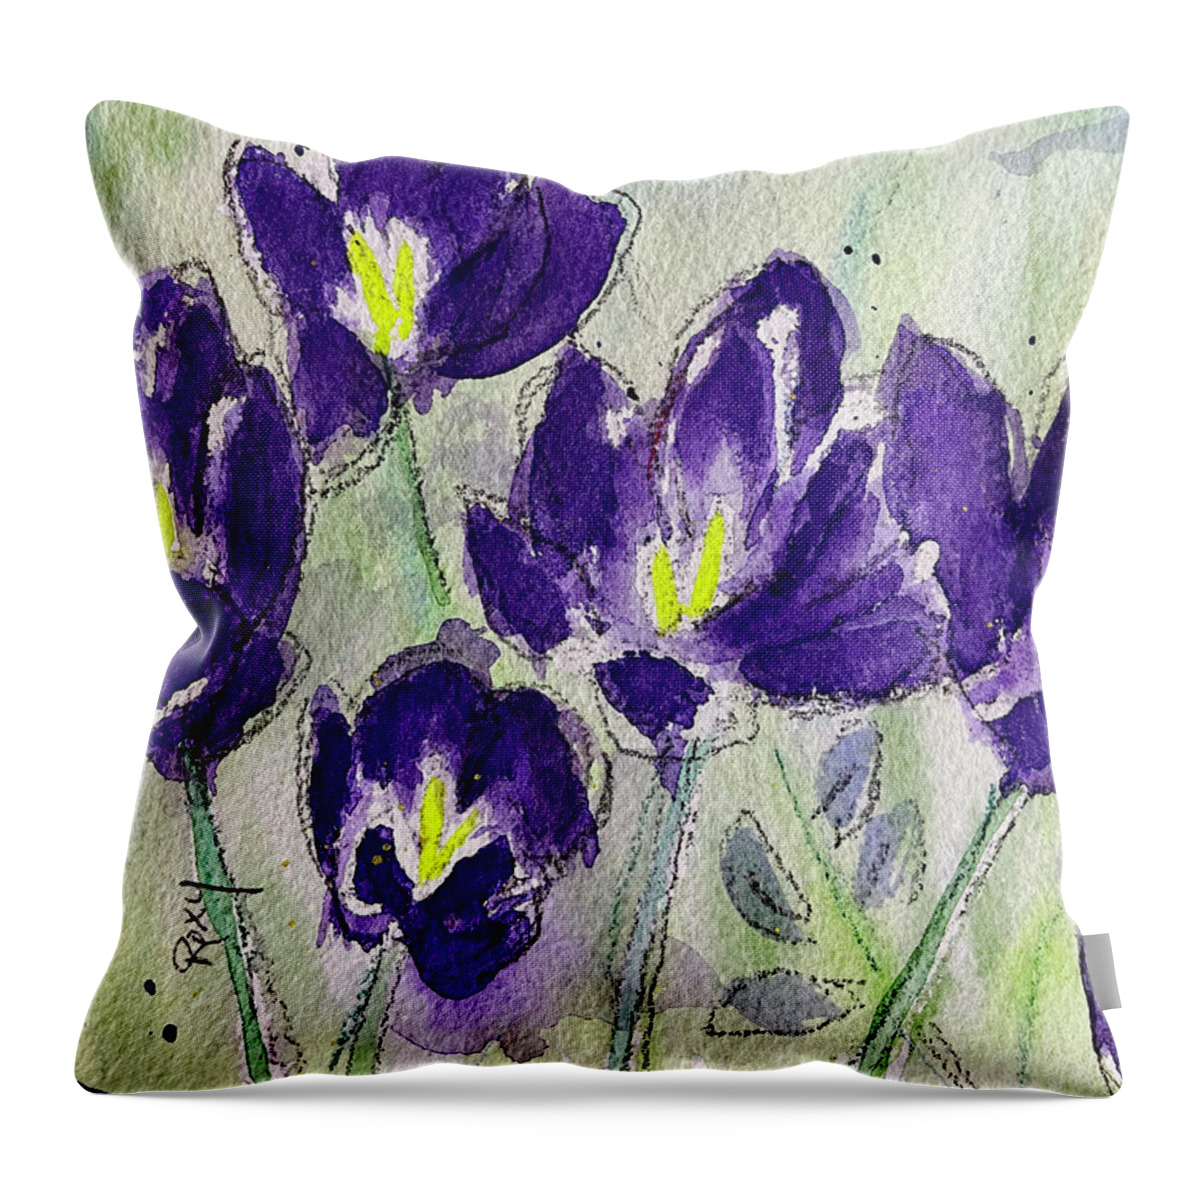 Crocus Throw Pillow featuring the painting Crocuses by Roxy Rich